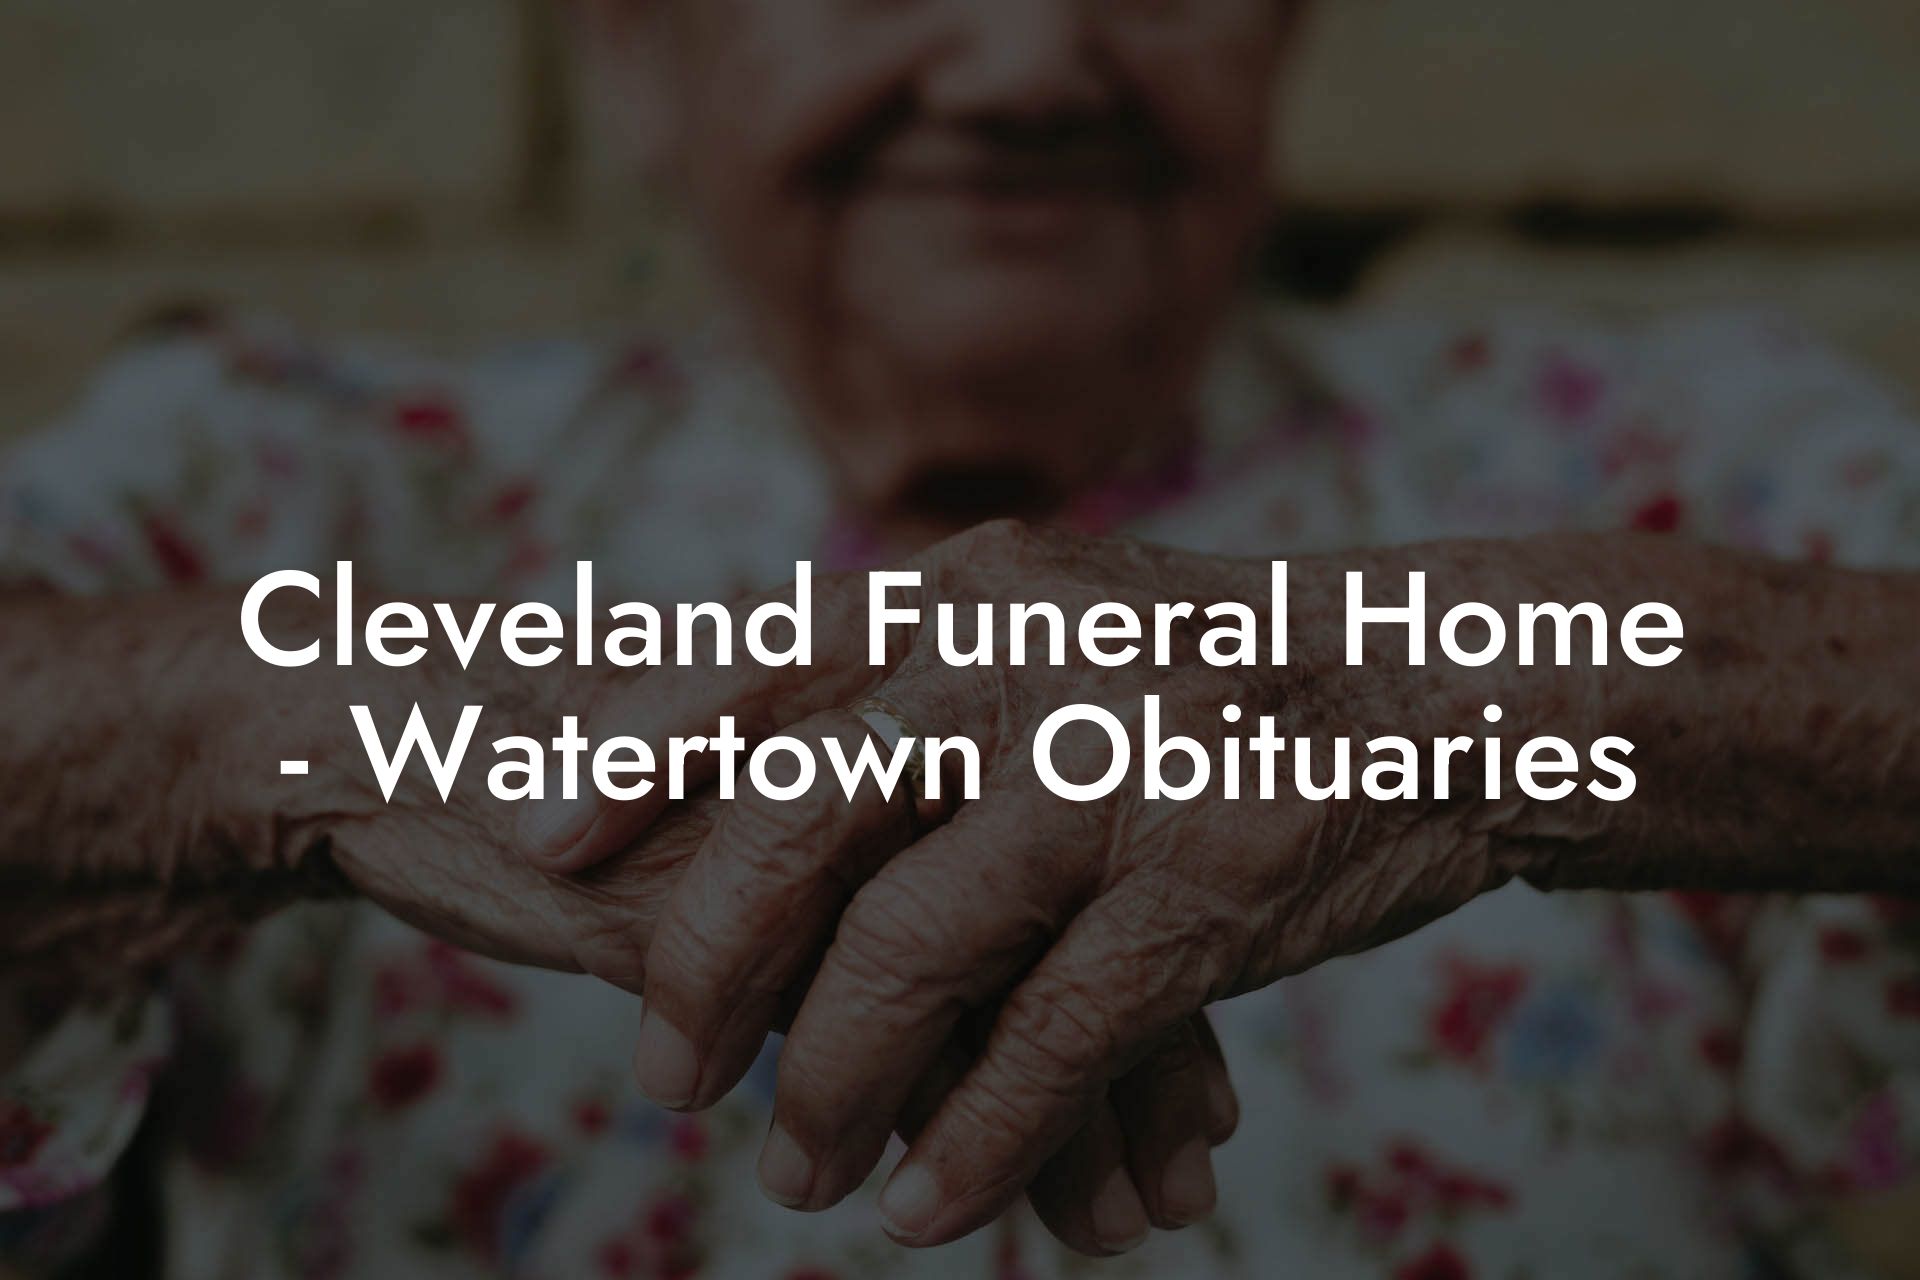 Cleveland Funeral Home - Watertown Obituaries